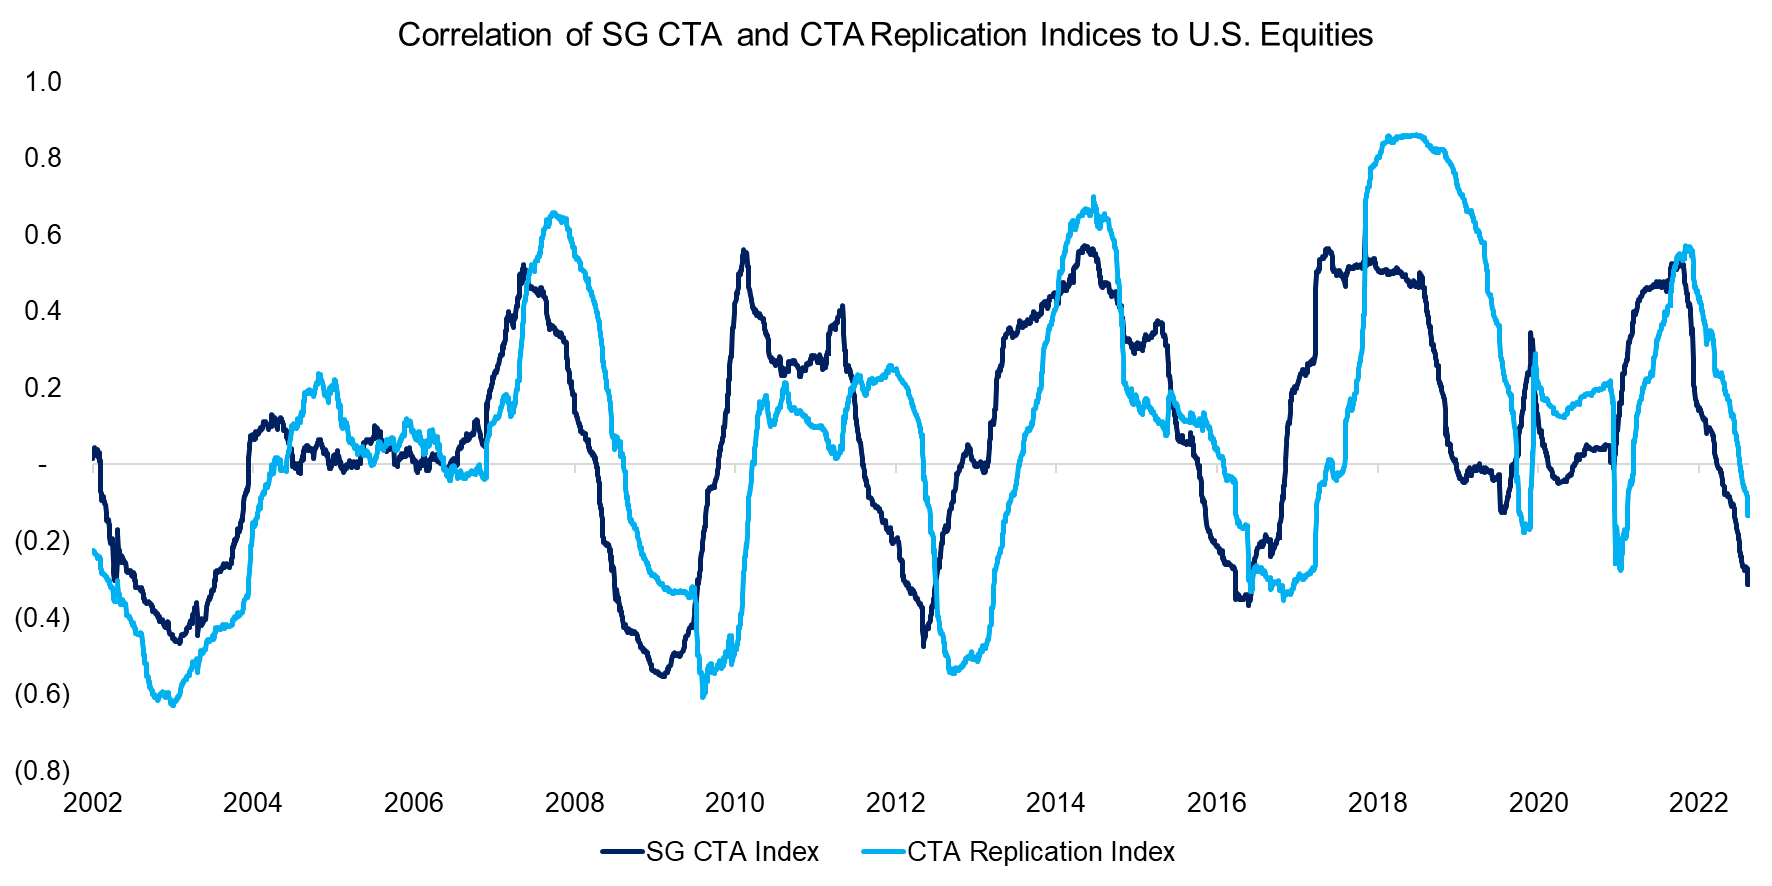 Correlation of SG CTA and CTA Replication Indices to U.S. Equities